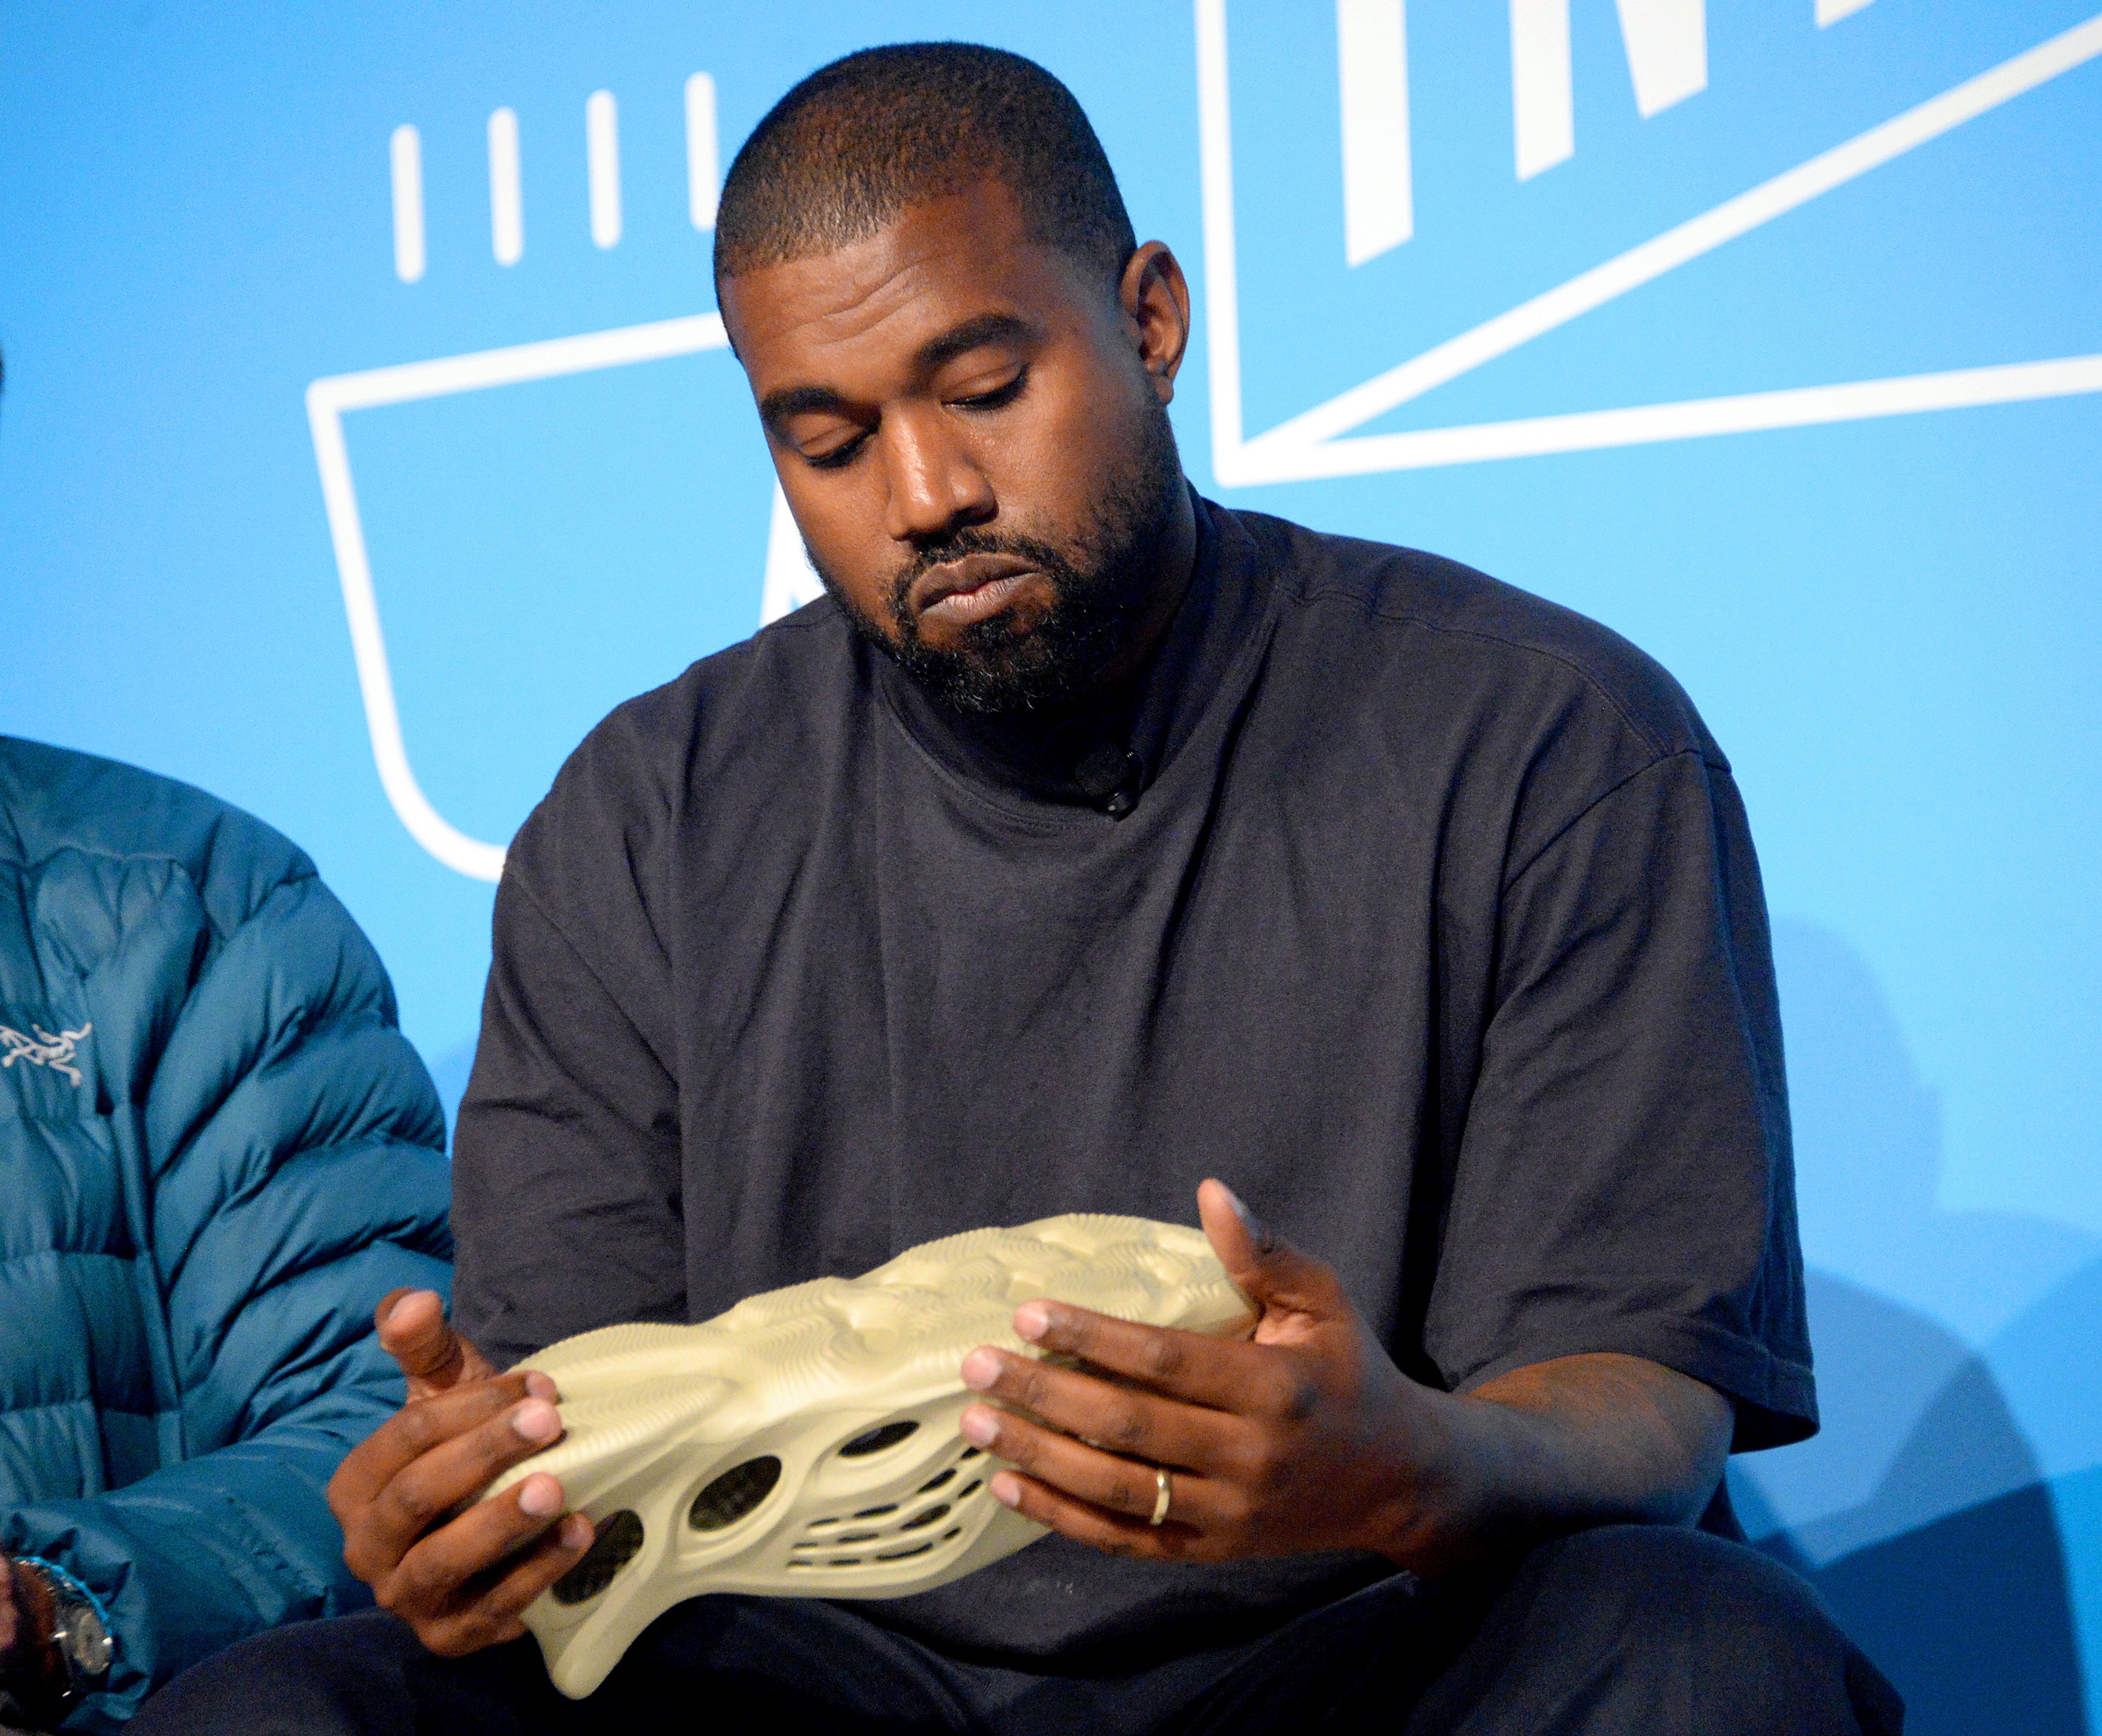 Kanye West's Yeezy Foam Runners Are The Ugliest Sneakers Ever